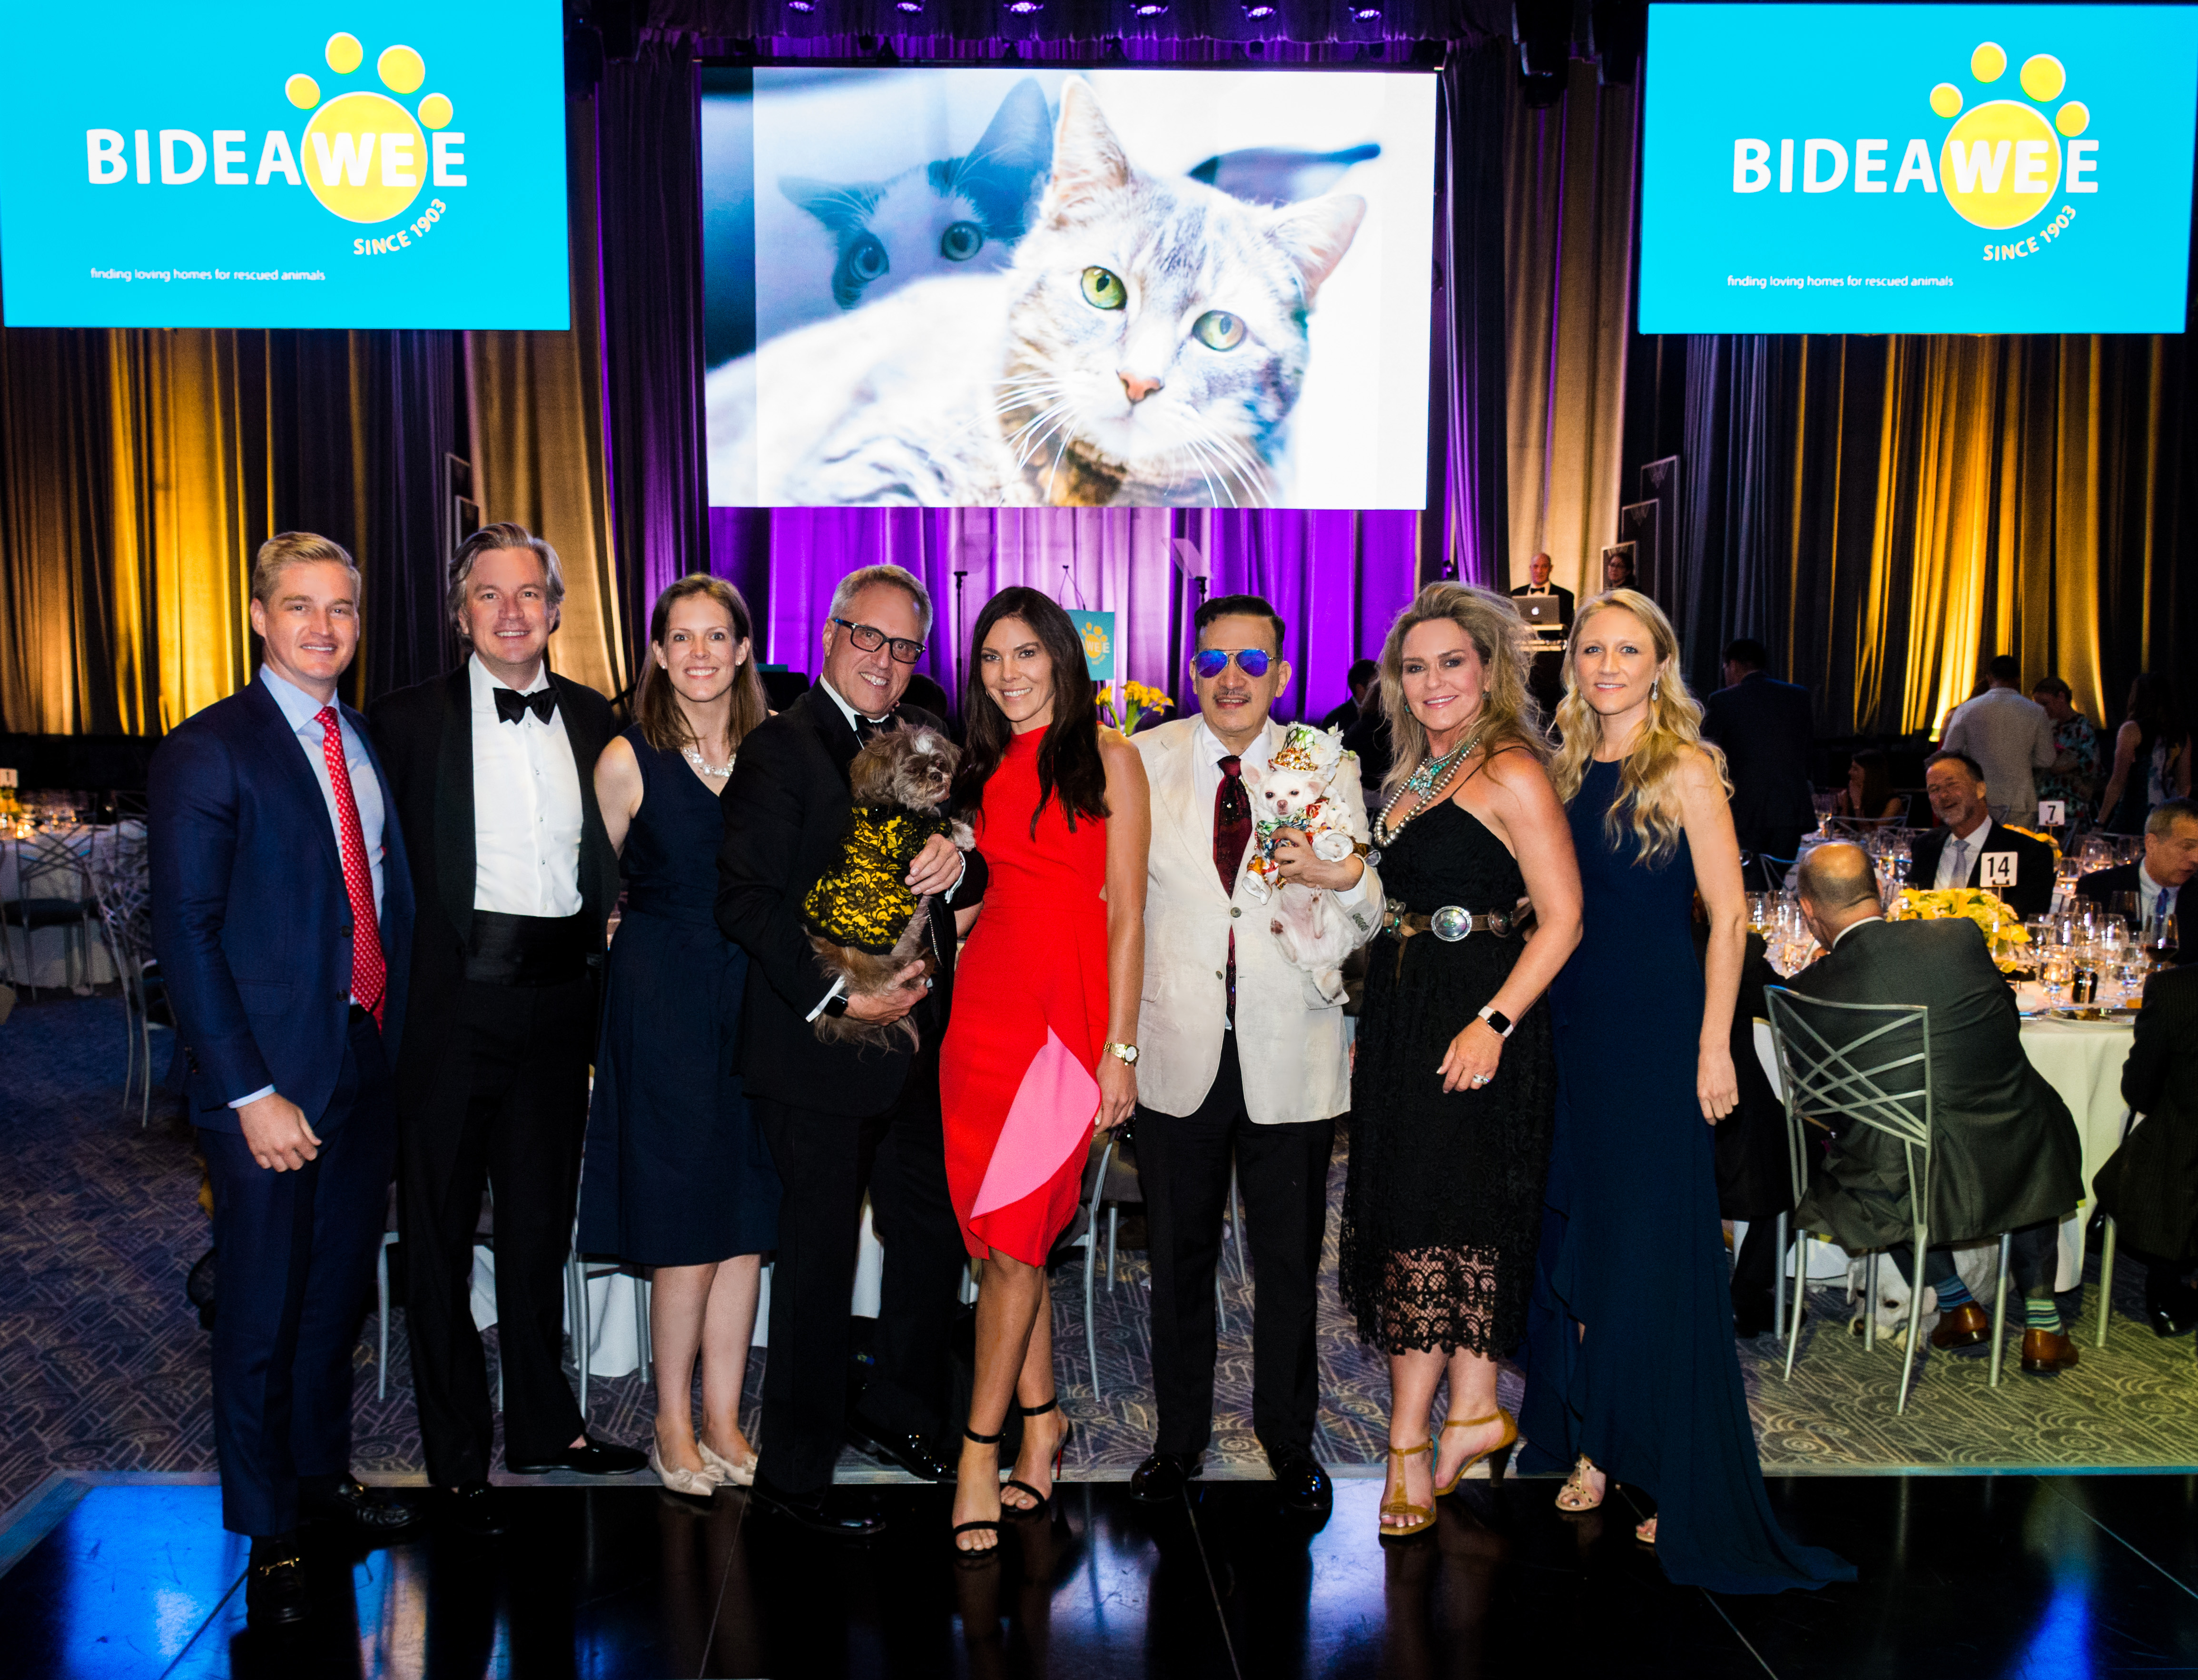 Anthony Rubio with Chihuahua Kimba attends the 2019 Bideawee Ball in New York